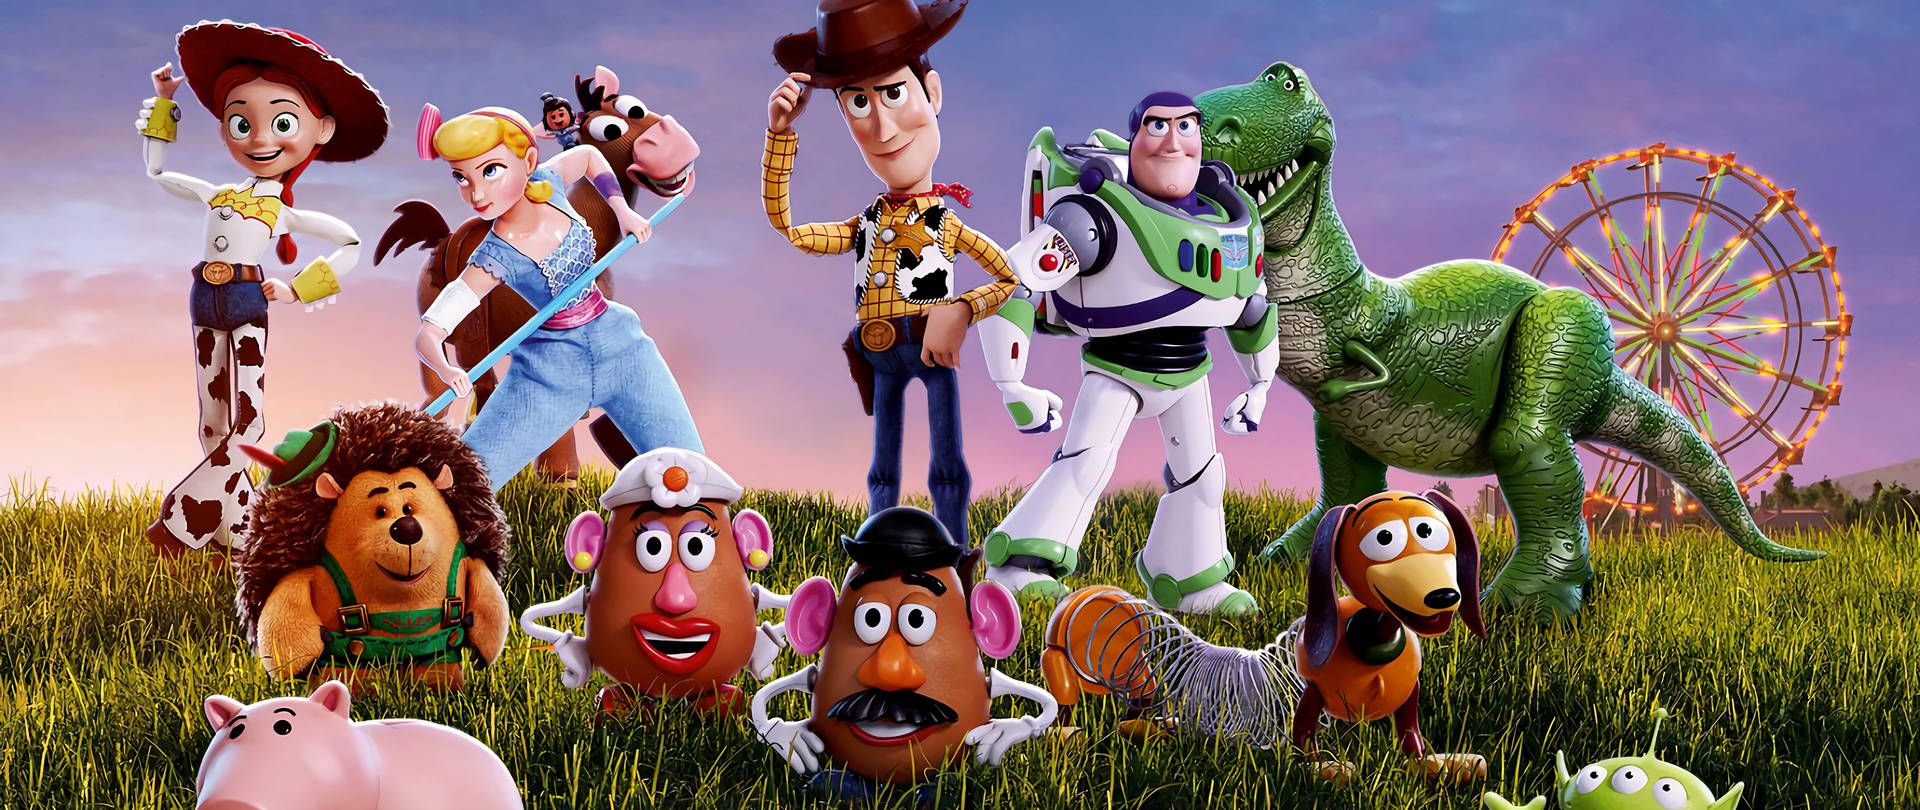 Toy Story 4 Characters Artwork